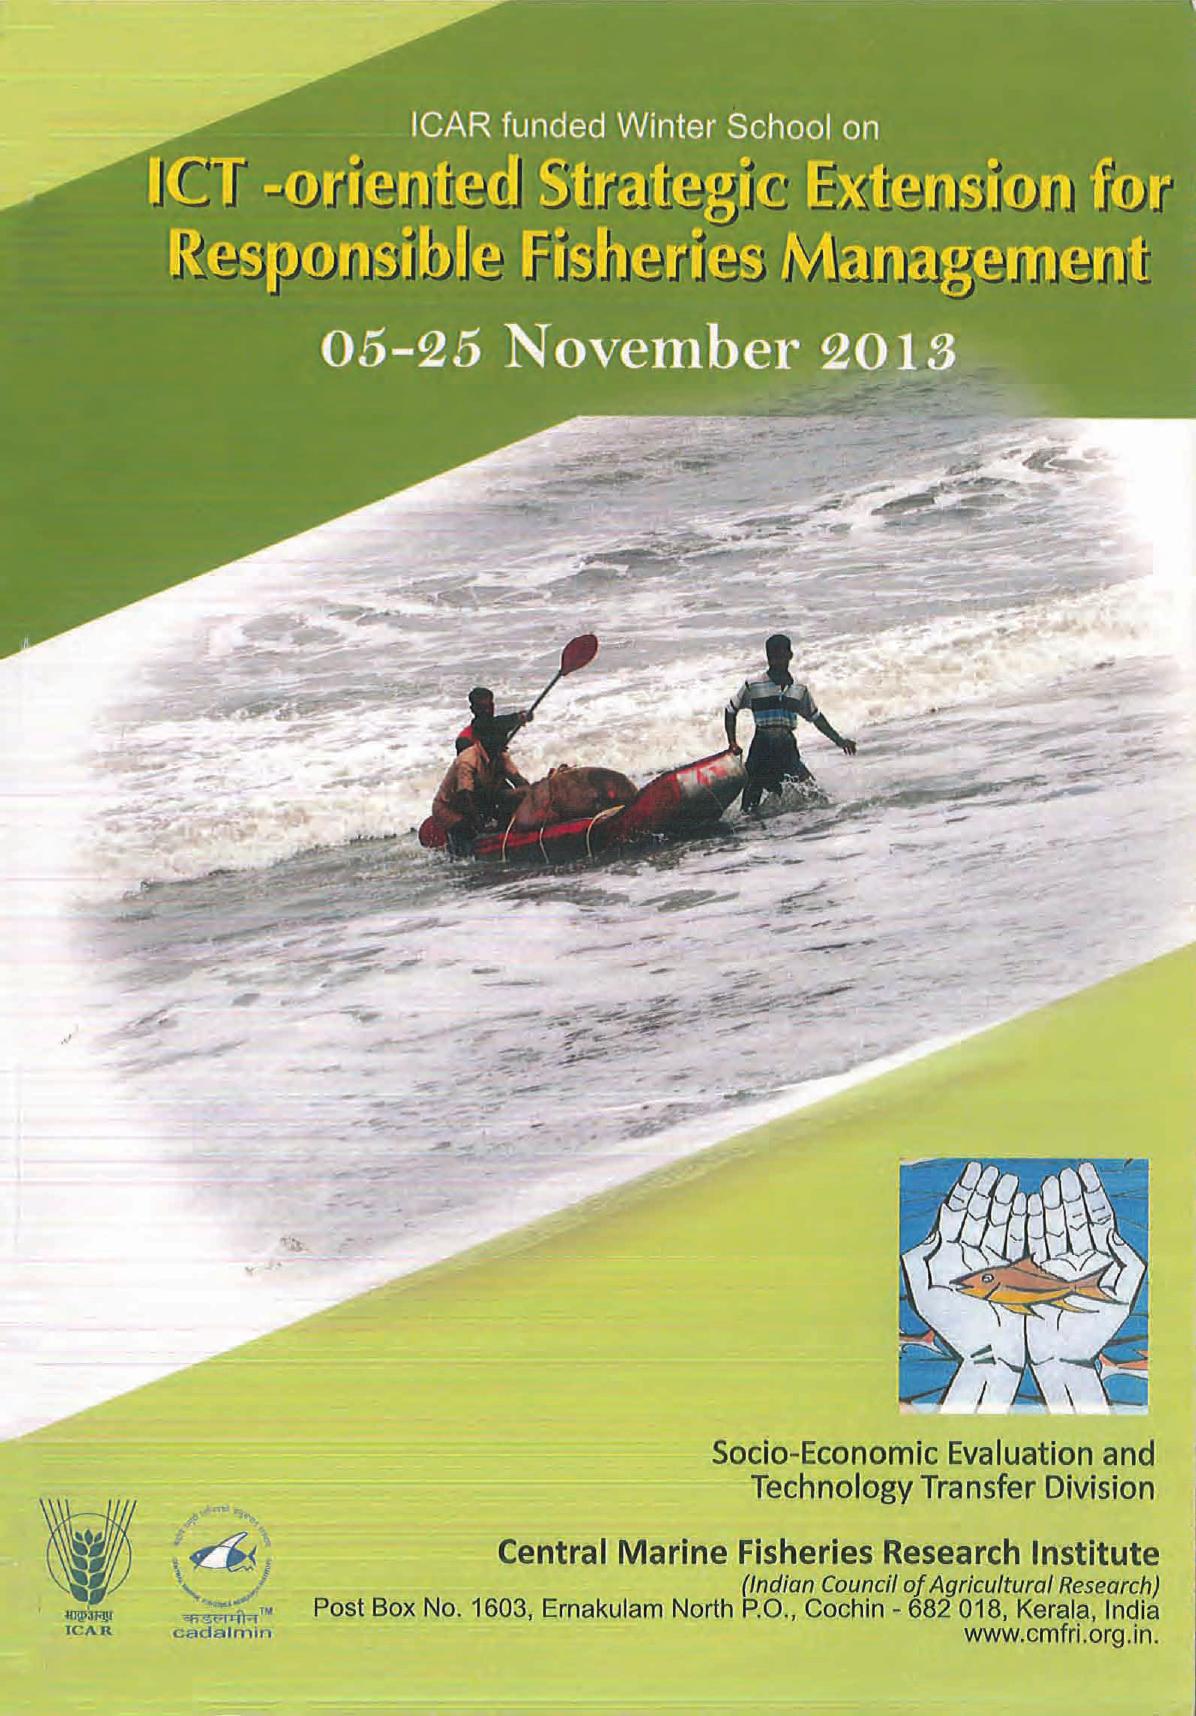 ICT -oriented Strategic Extension for Responsible Fisheries Management 2013